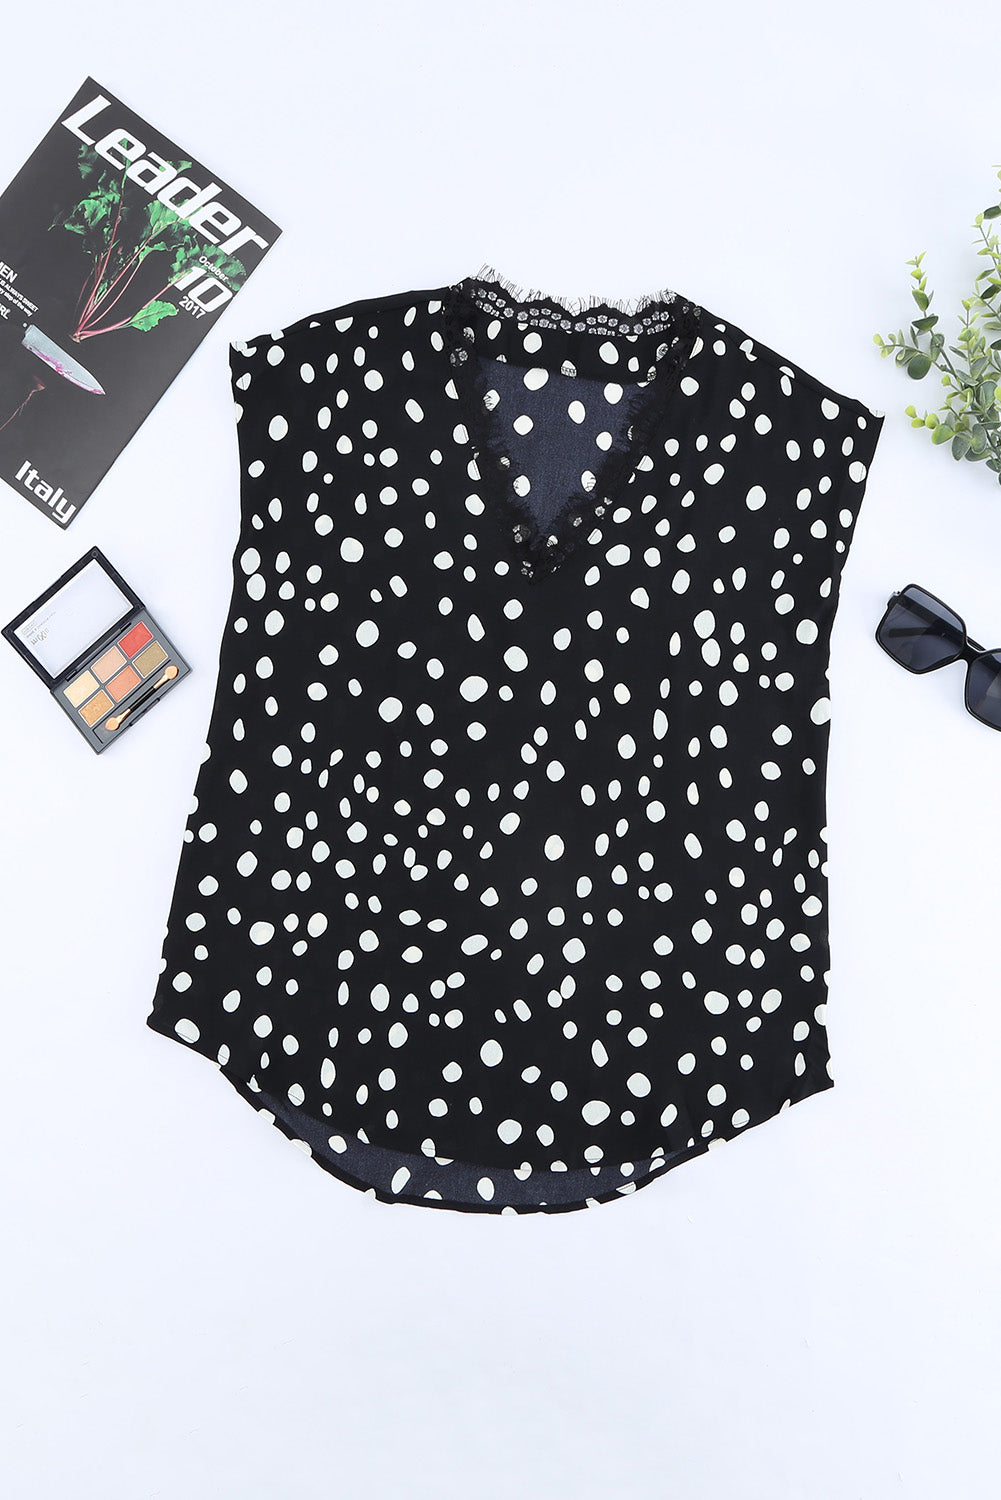 White/Apricot Floral Scalloped V Neck Short Sleeves Top Black Polka Dot Scalloped V Neck Short Sleeves Top Green Leopard Scalloped V Neck Short Sleeves Top